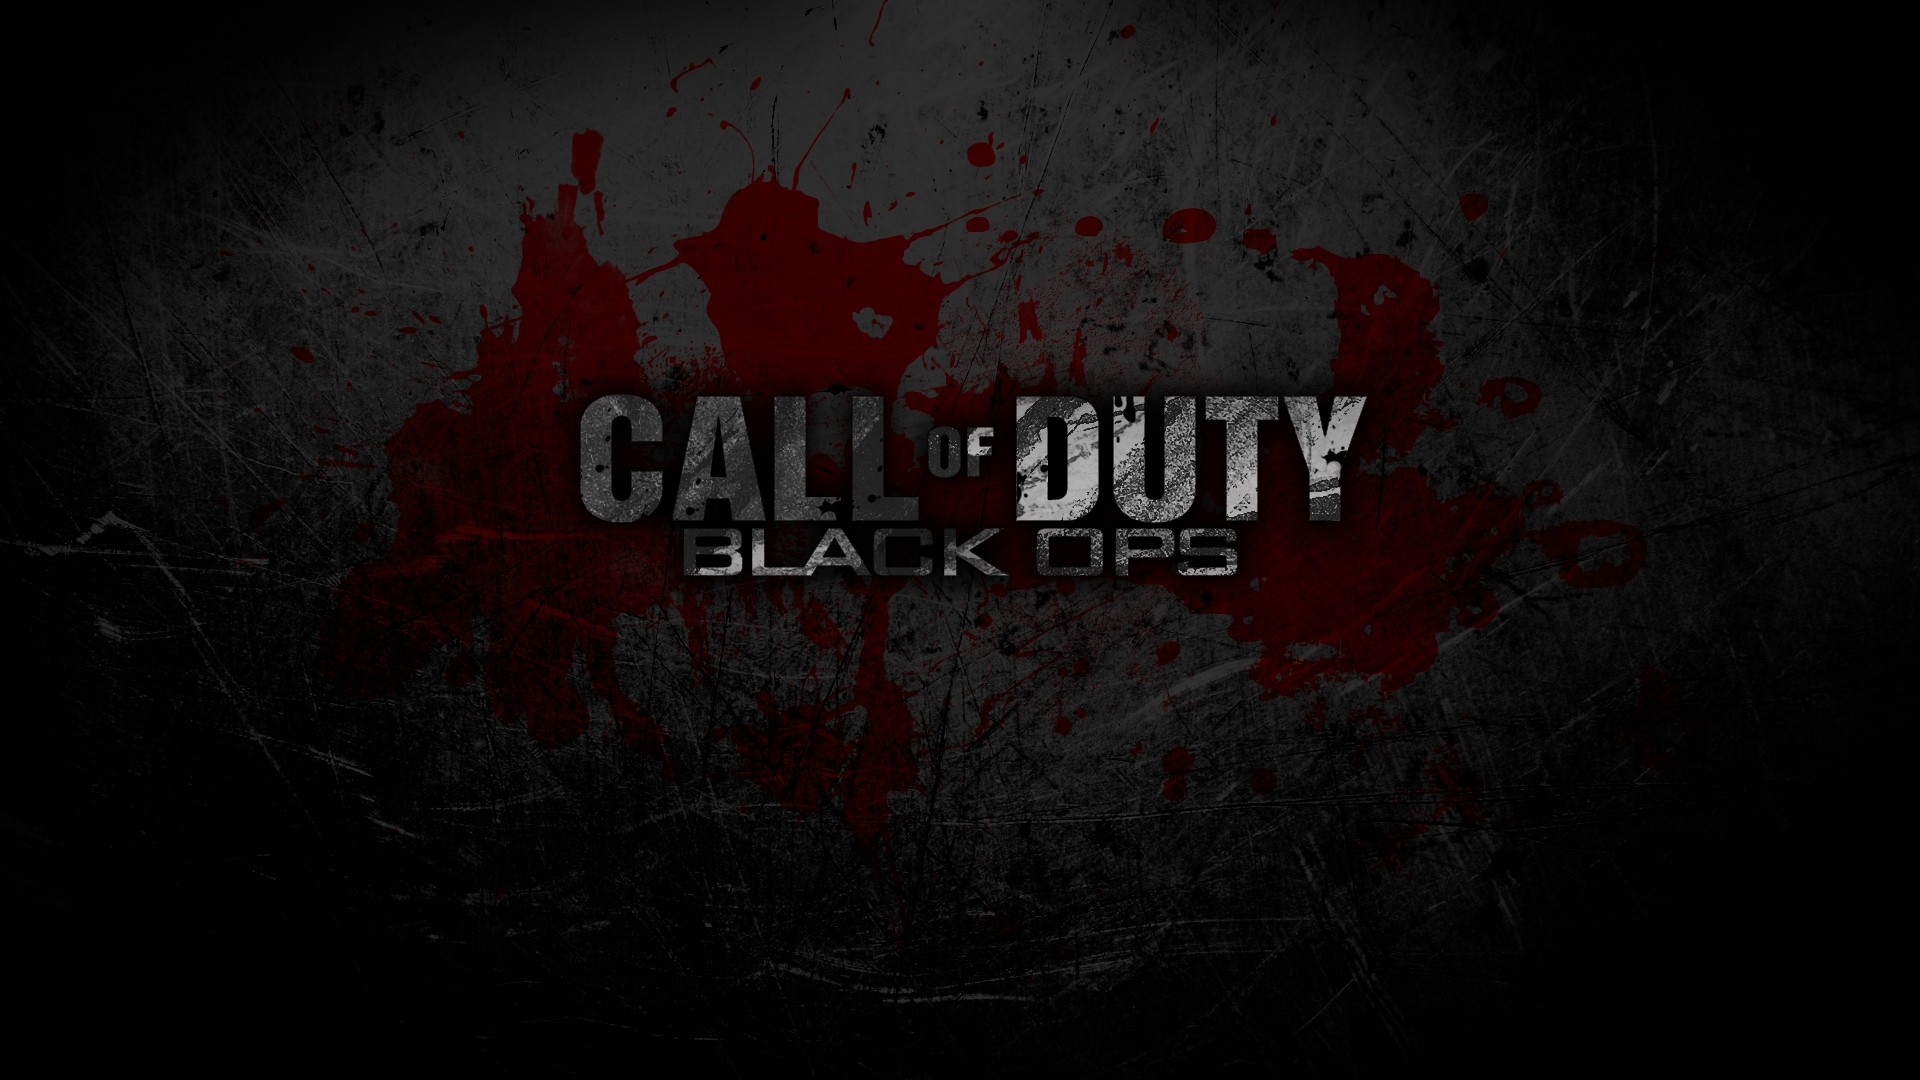 Call Of Duty: Black Ops, Video Games Wallpaper